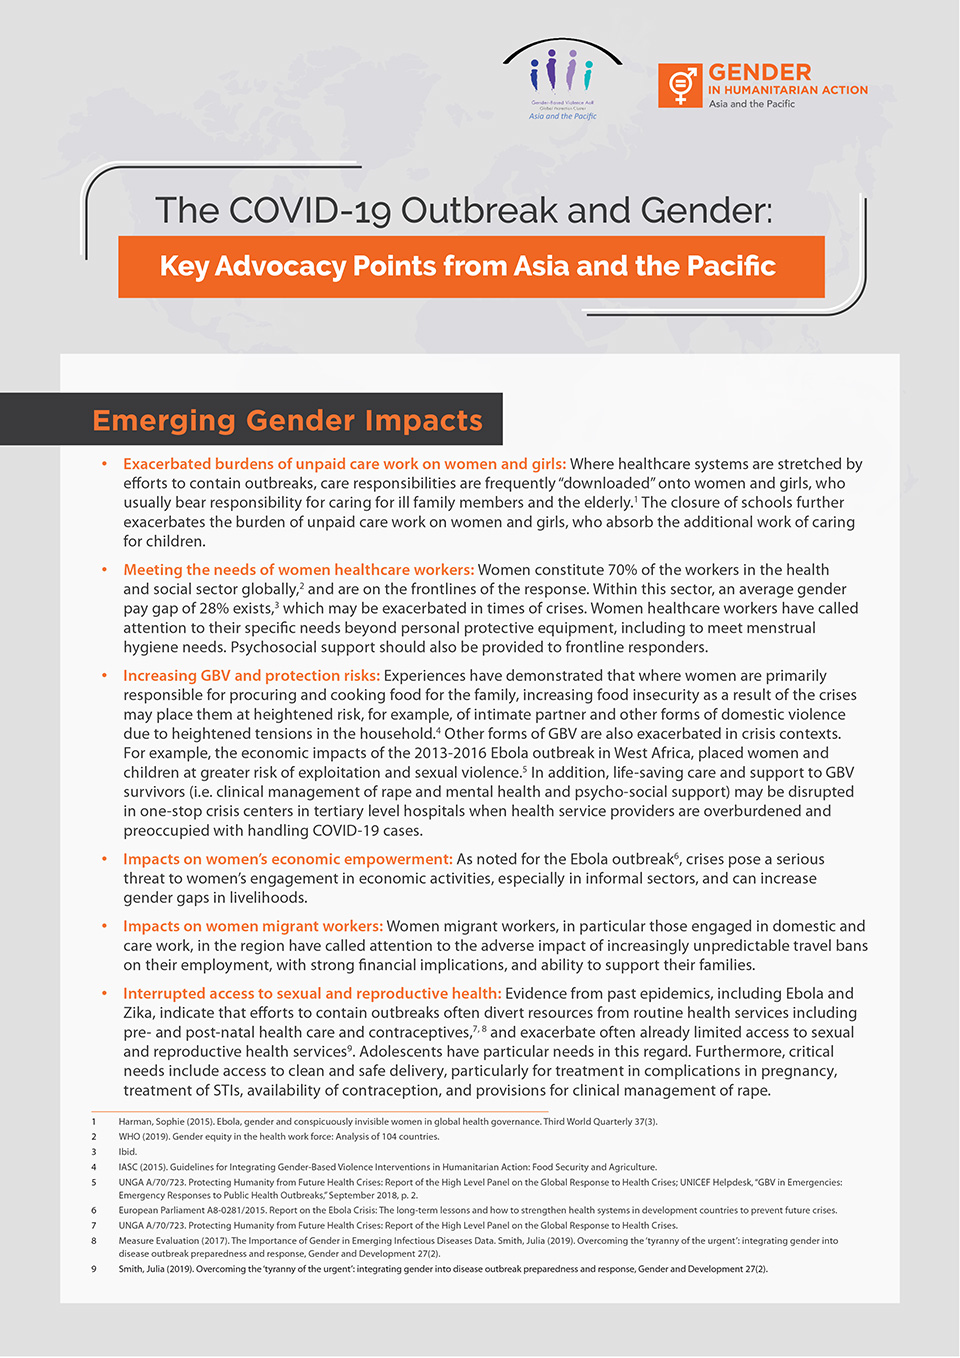 The COVID-19 Outbreak and Gender